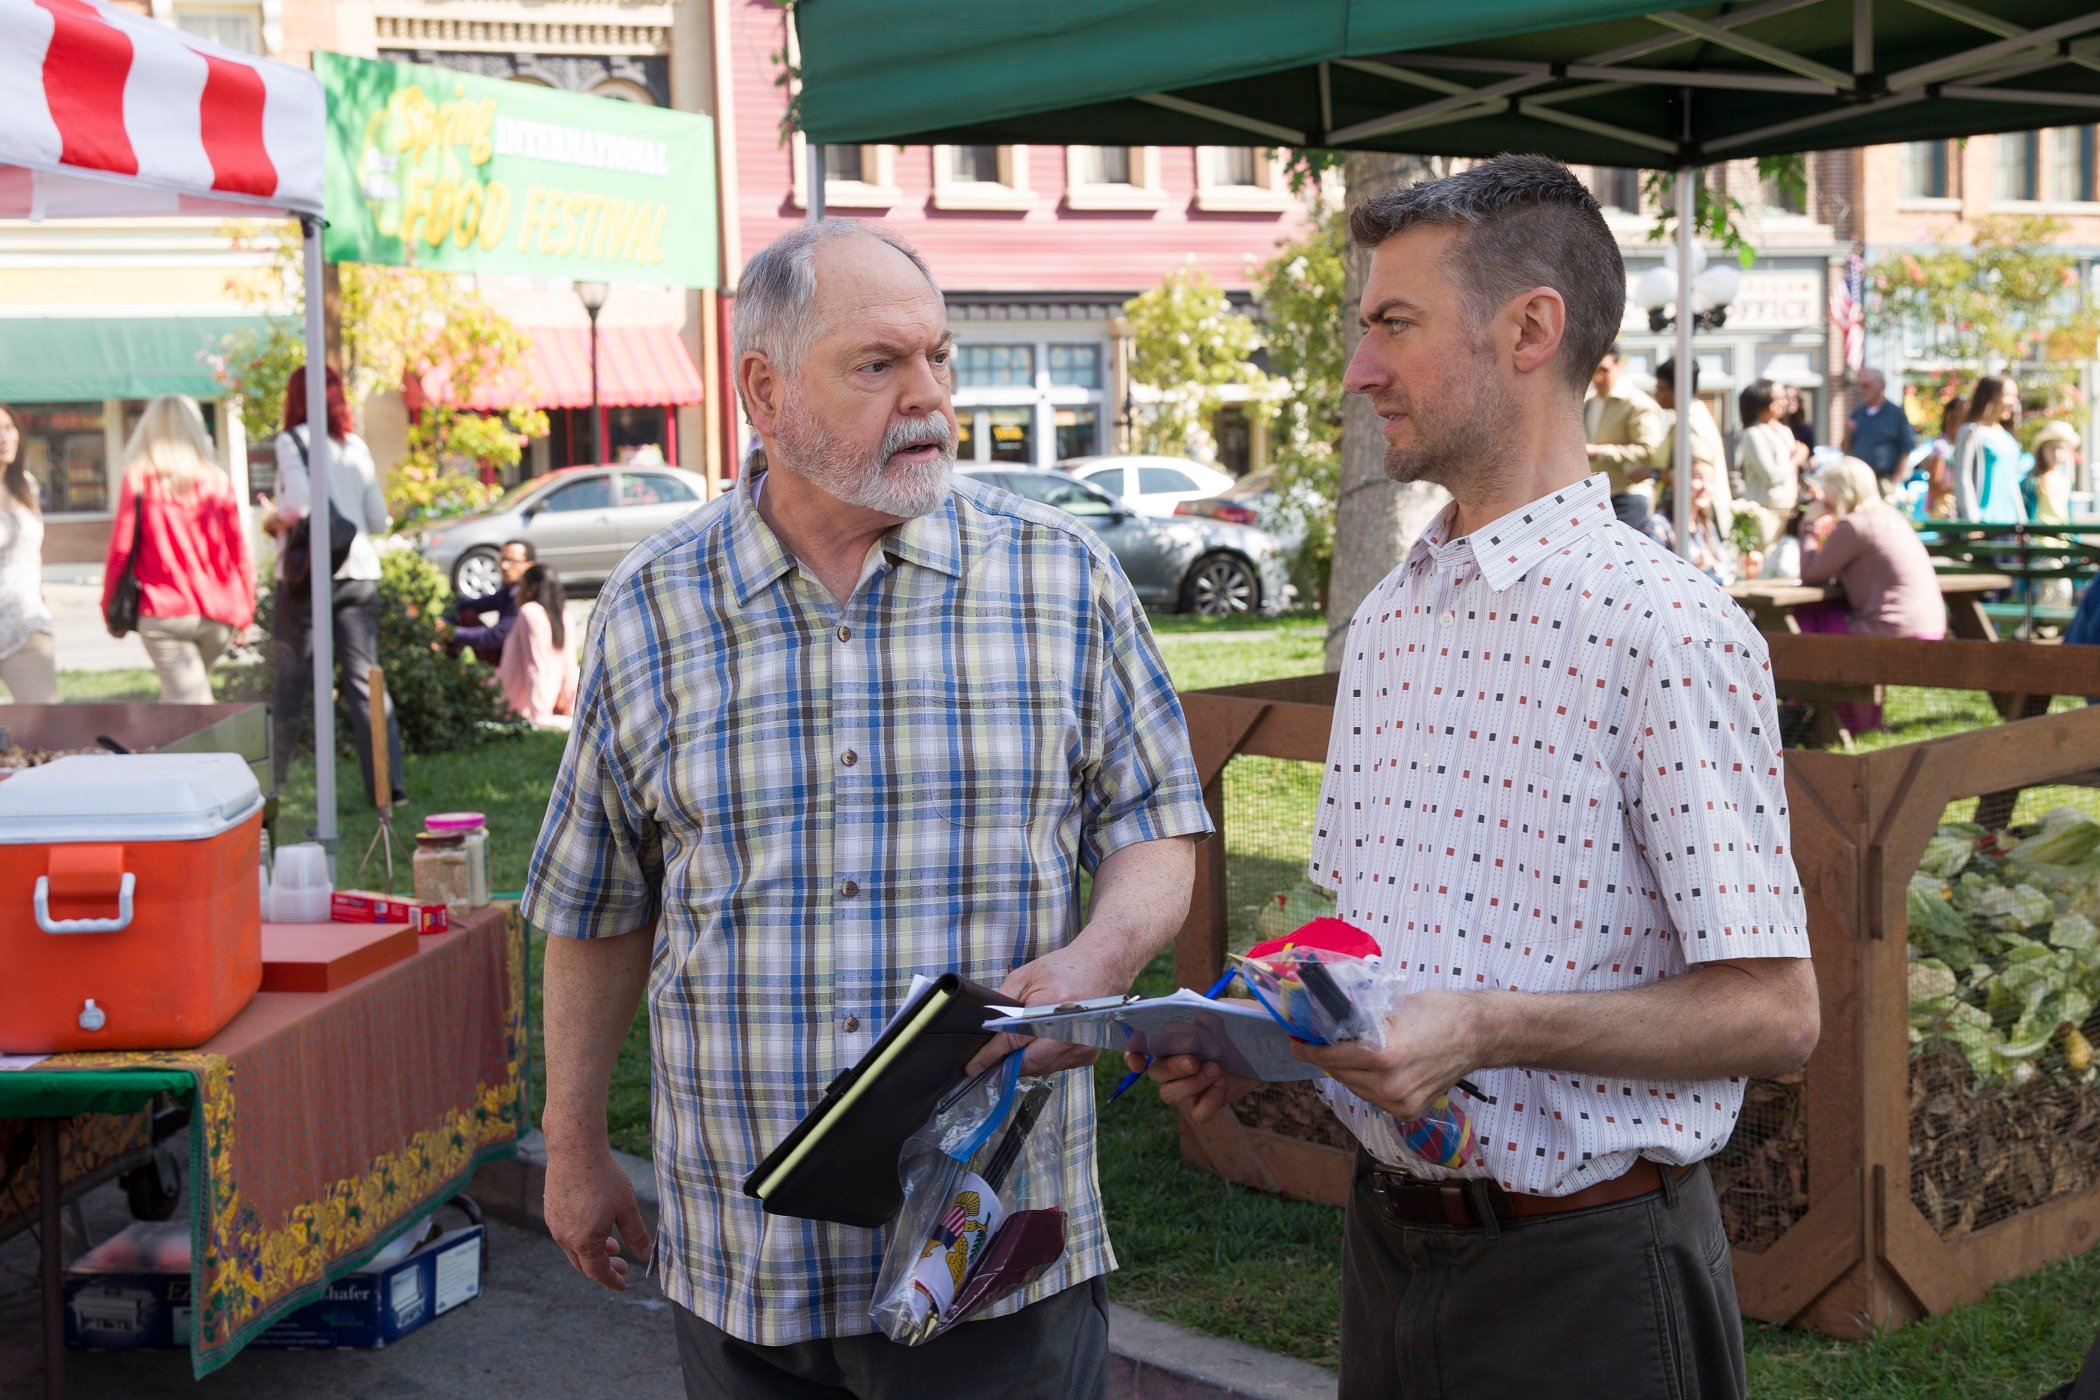 Michael Winters as Taylor Doosey and Sean Gunn as Kirk Gleason discuss town business in Stars Hollow's town center